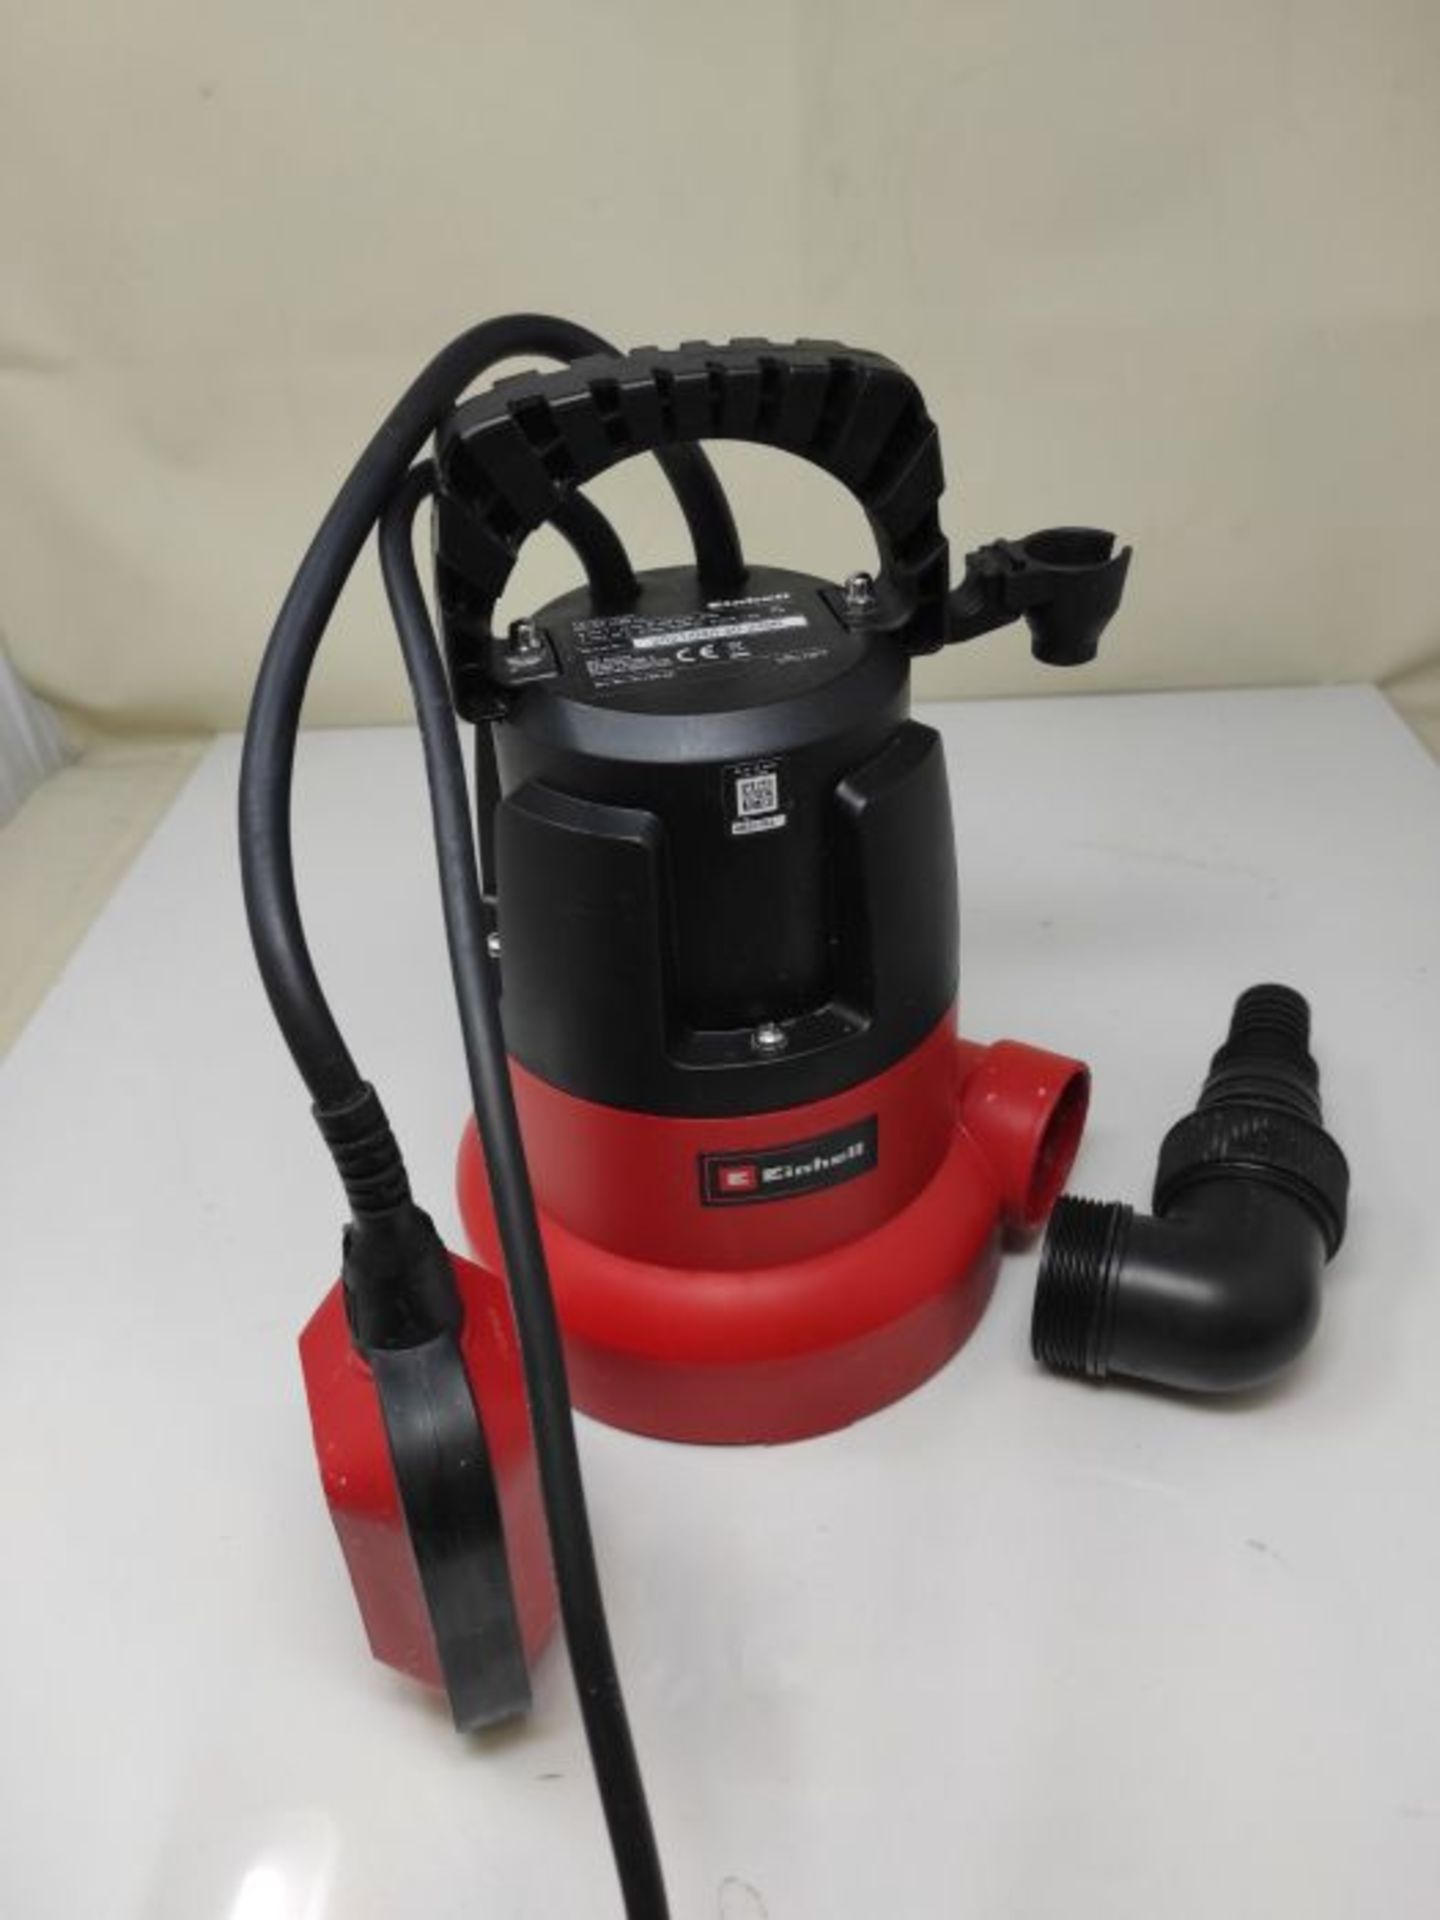 Einhell Submersible Pump GC-SP 3580 LL (350 W, 8000 L/H Extraction Down to 1 mm, Pump - Image 3 of 3